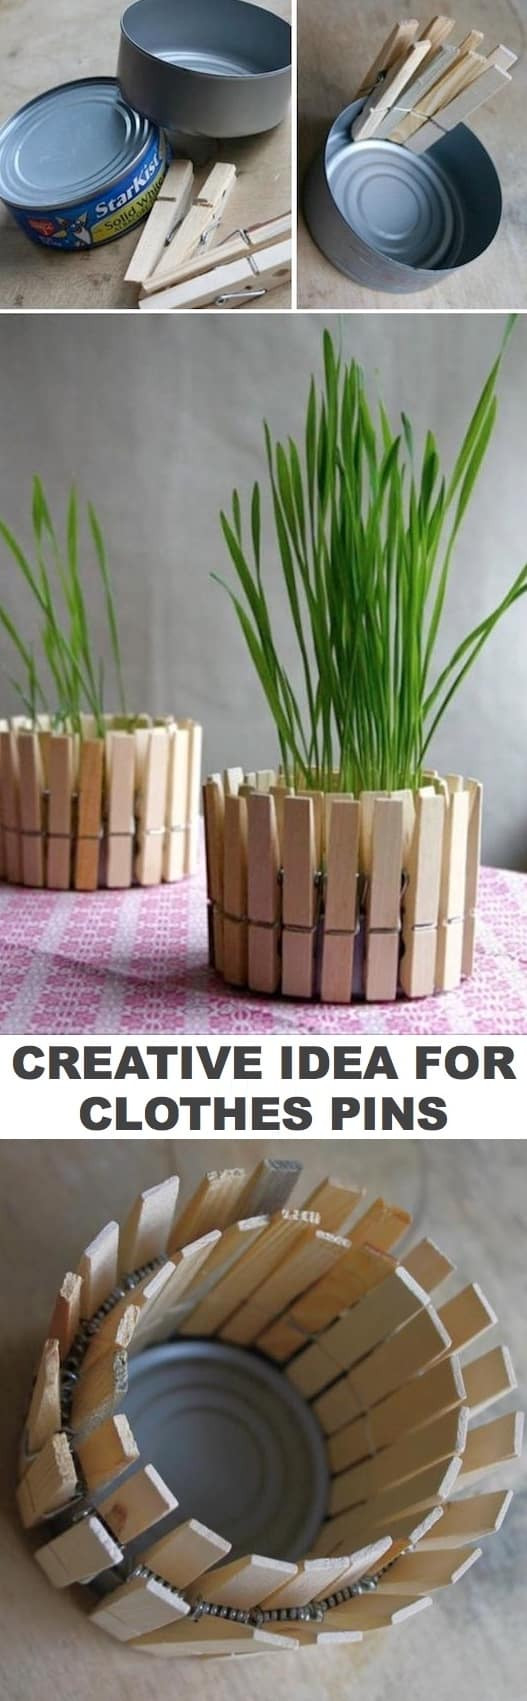 Easy Crafting Ideas For Adults
 30 Easy Craft Ideas That Will Spark Your Creativity DIY